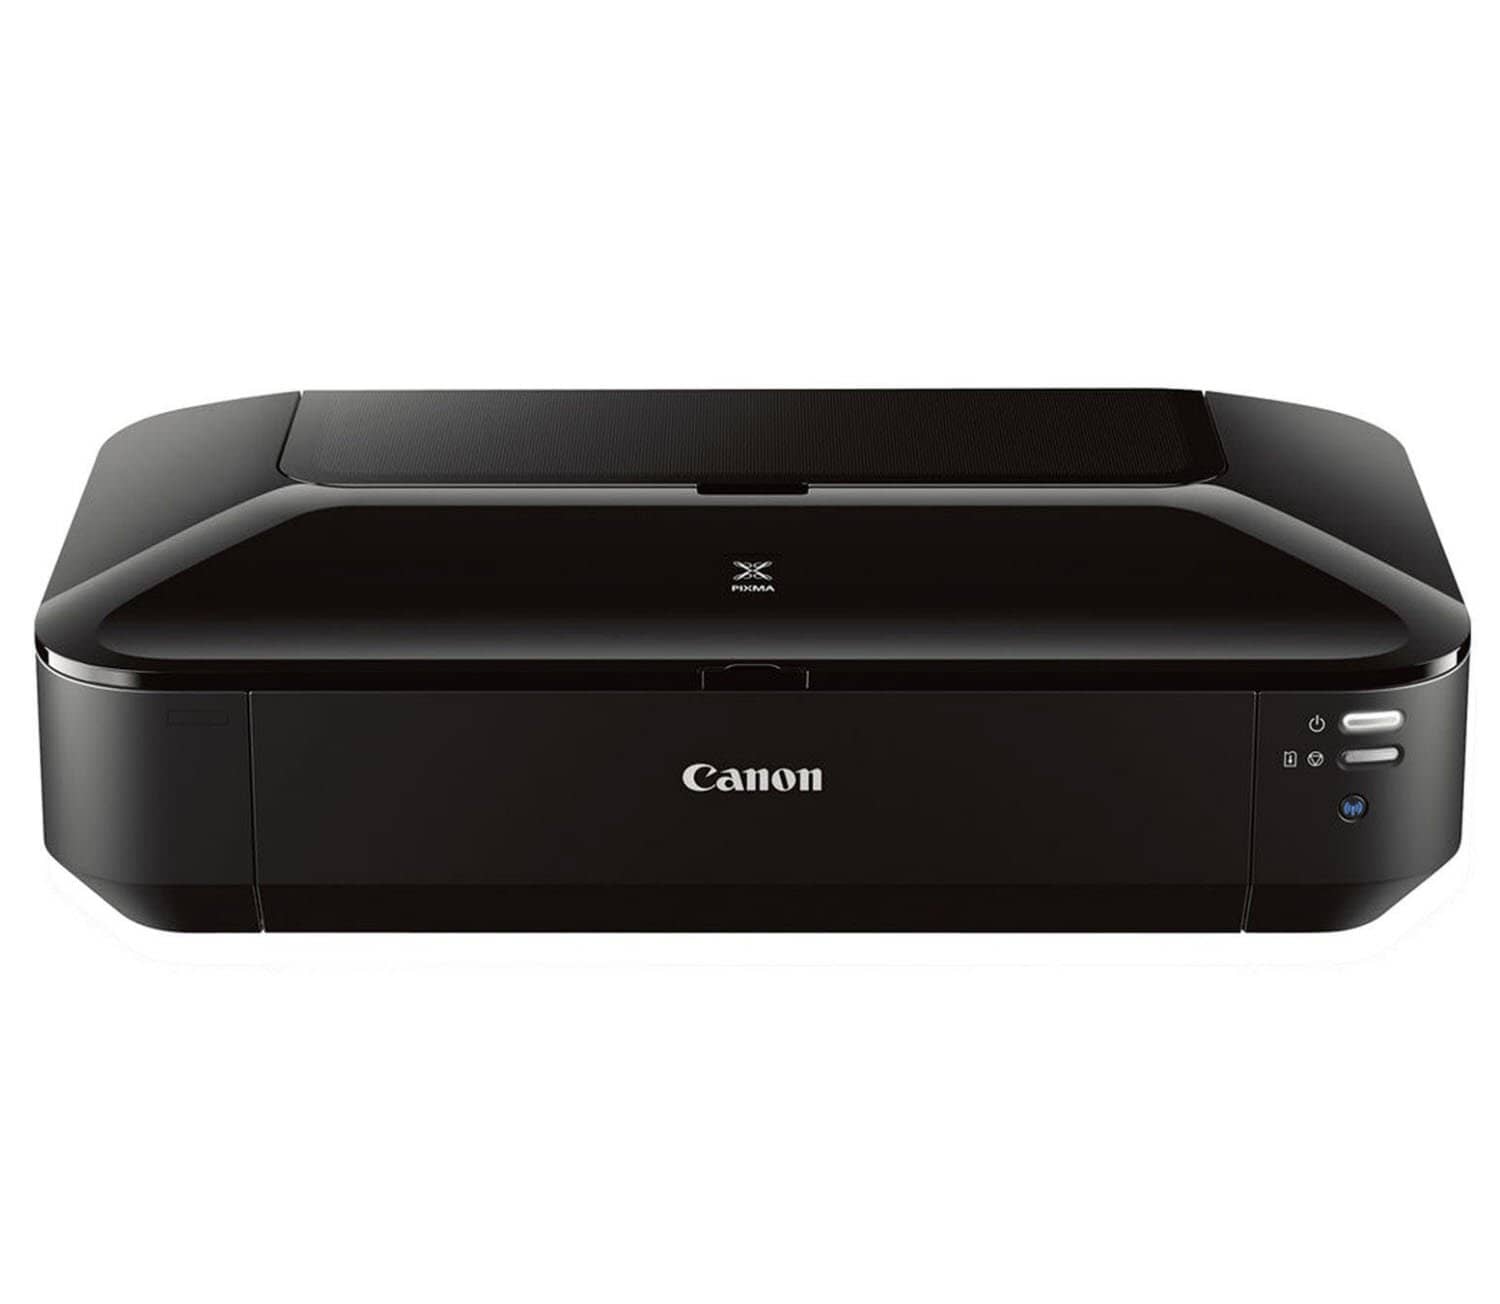 CANON PIXMA iX6820 Wireless Business Printer with AirPrint and Cloud Compatible - Black